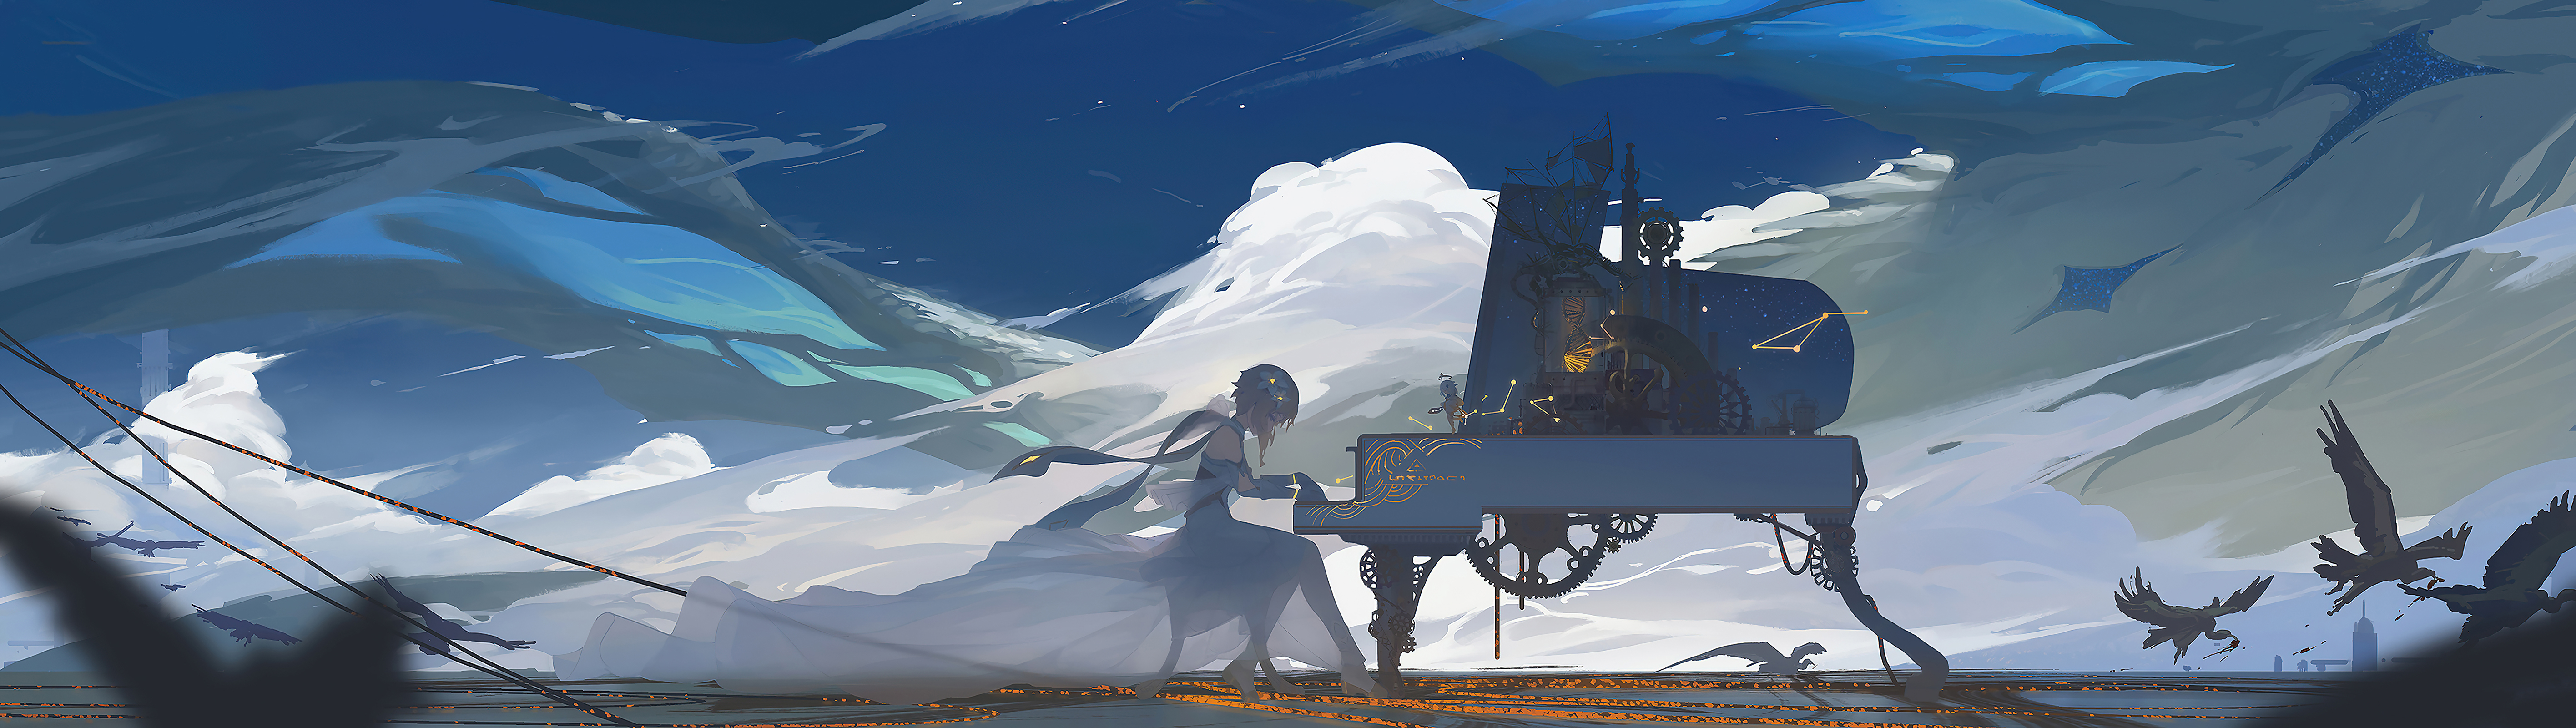 General 5663x1600 video games video game art digital art dress piano pianists clouds sky night birds architecture ultrawide anime girls void_0 Lumine (Genshin Impact) Paimon(Genshin Impact) Genshin Impact